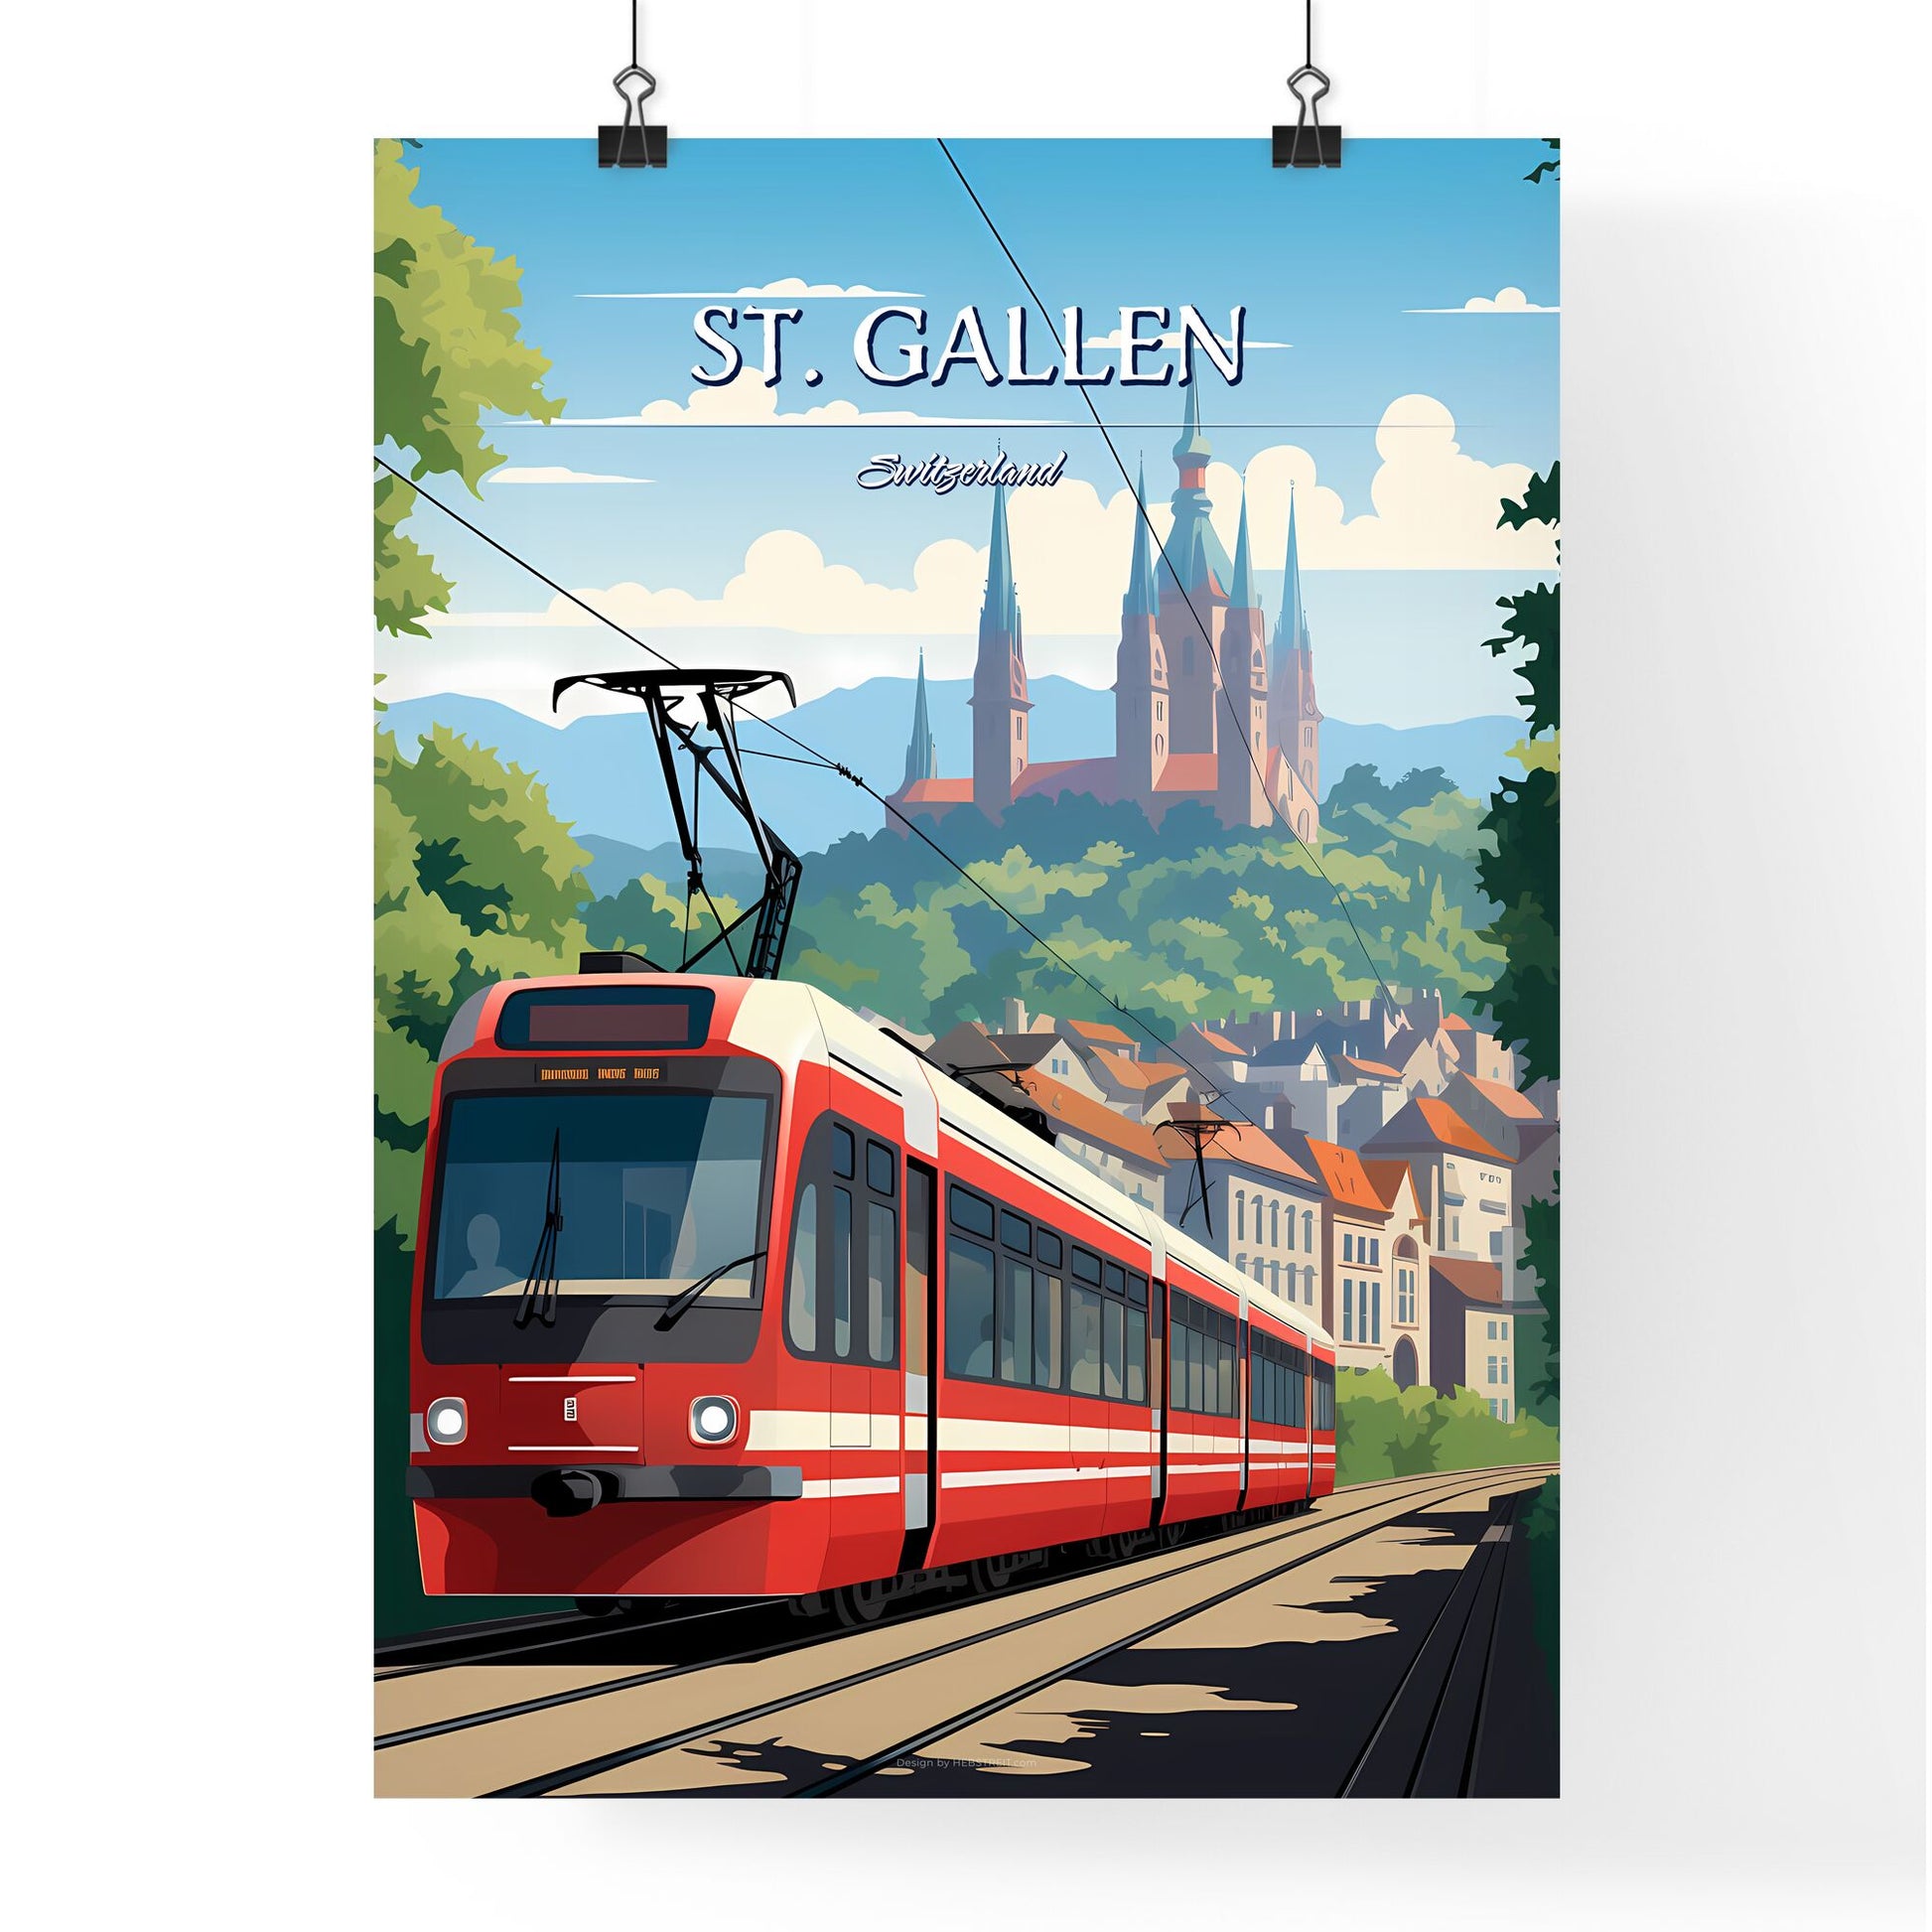 St. Gallen, Switzerland - Art print of a woman in a green outfit Default Title